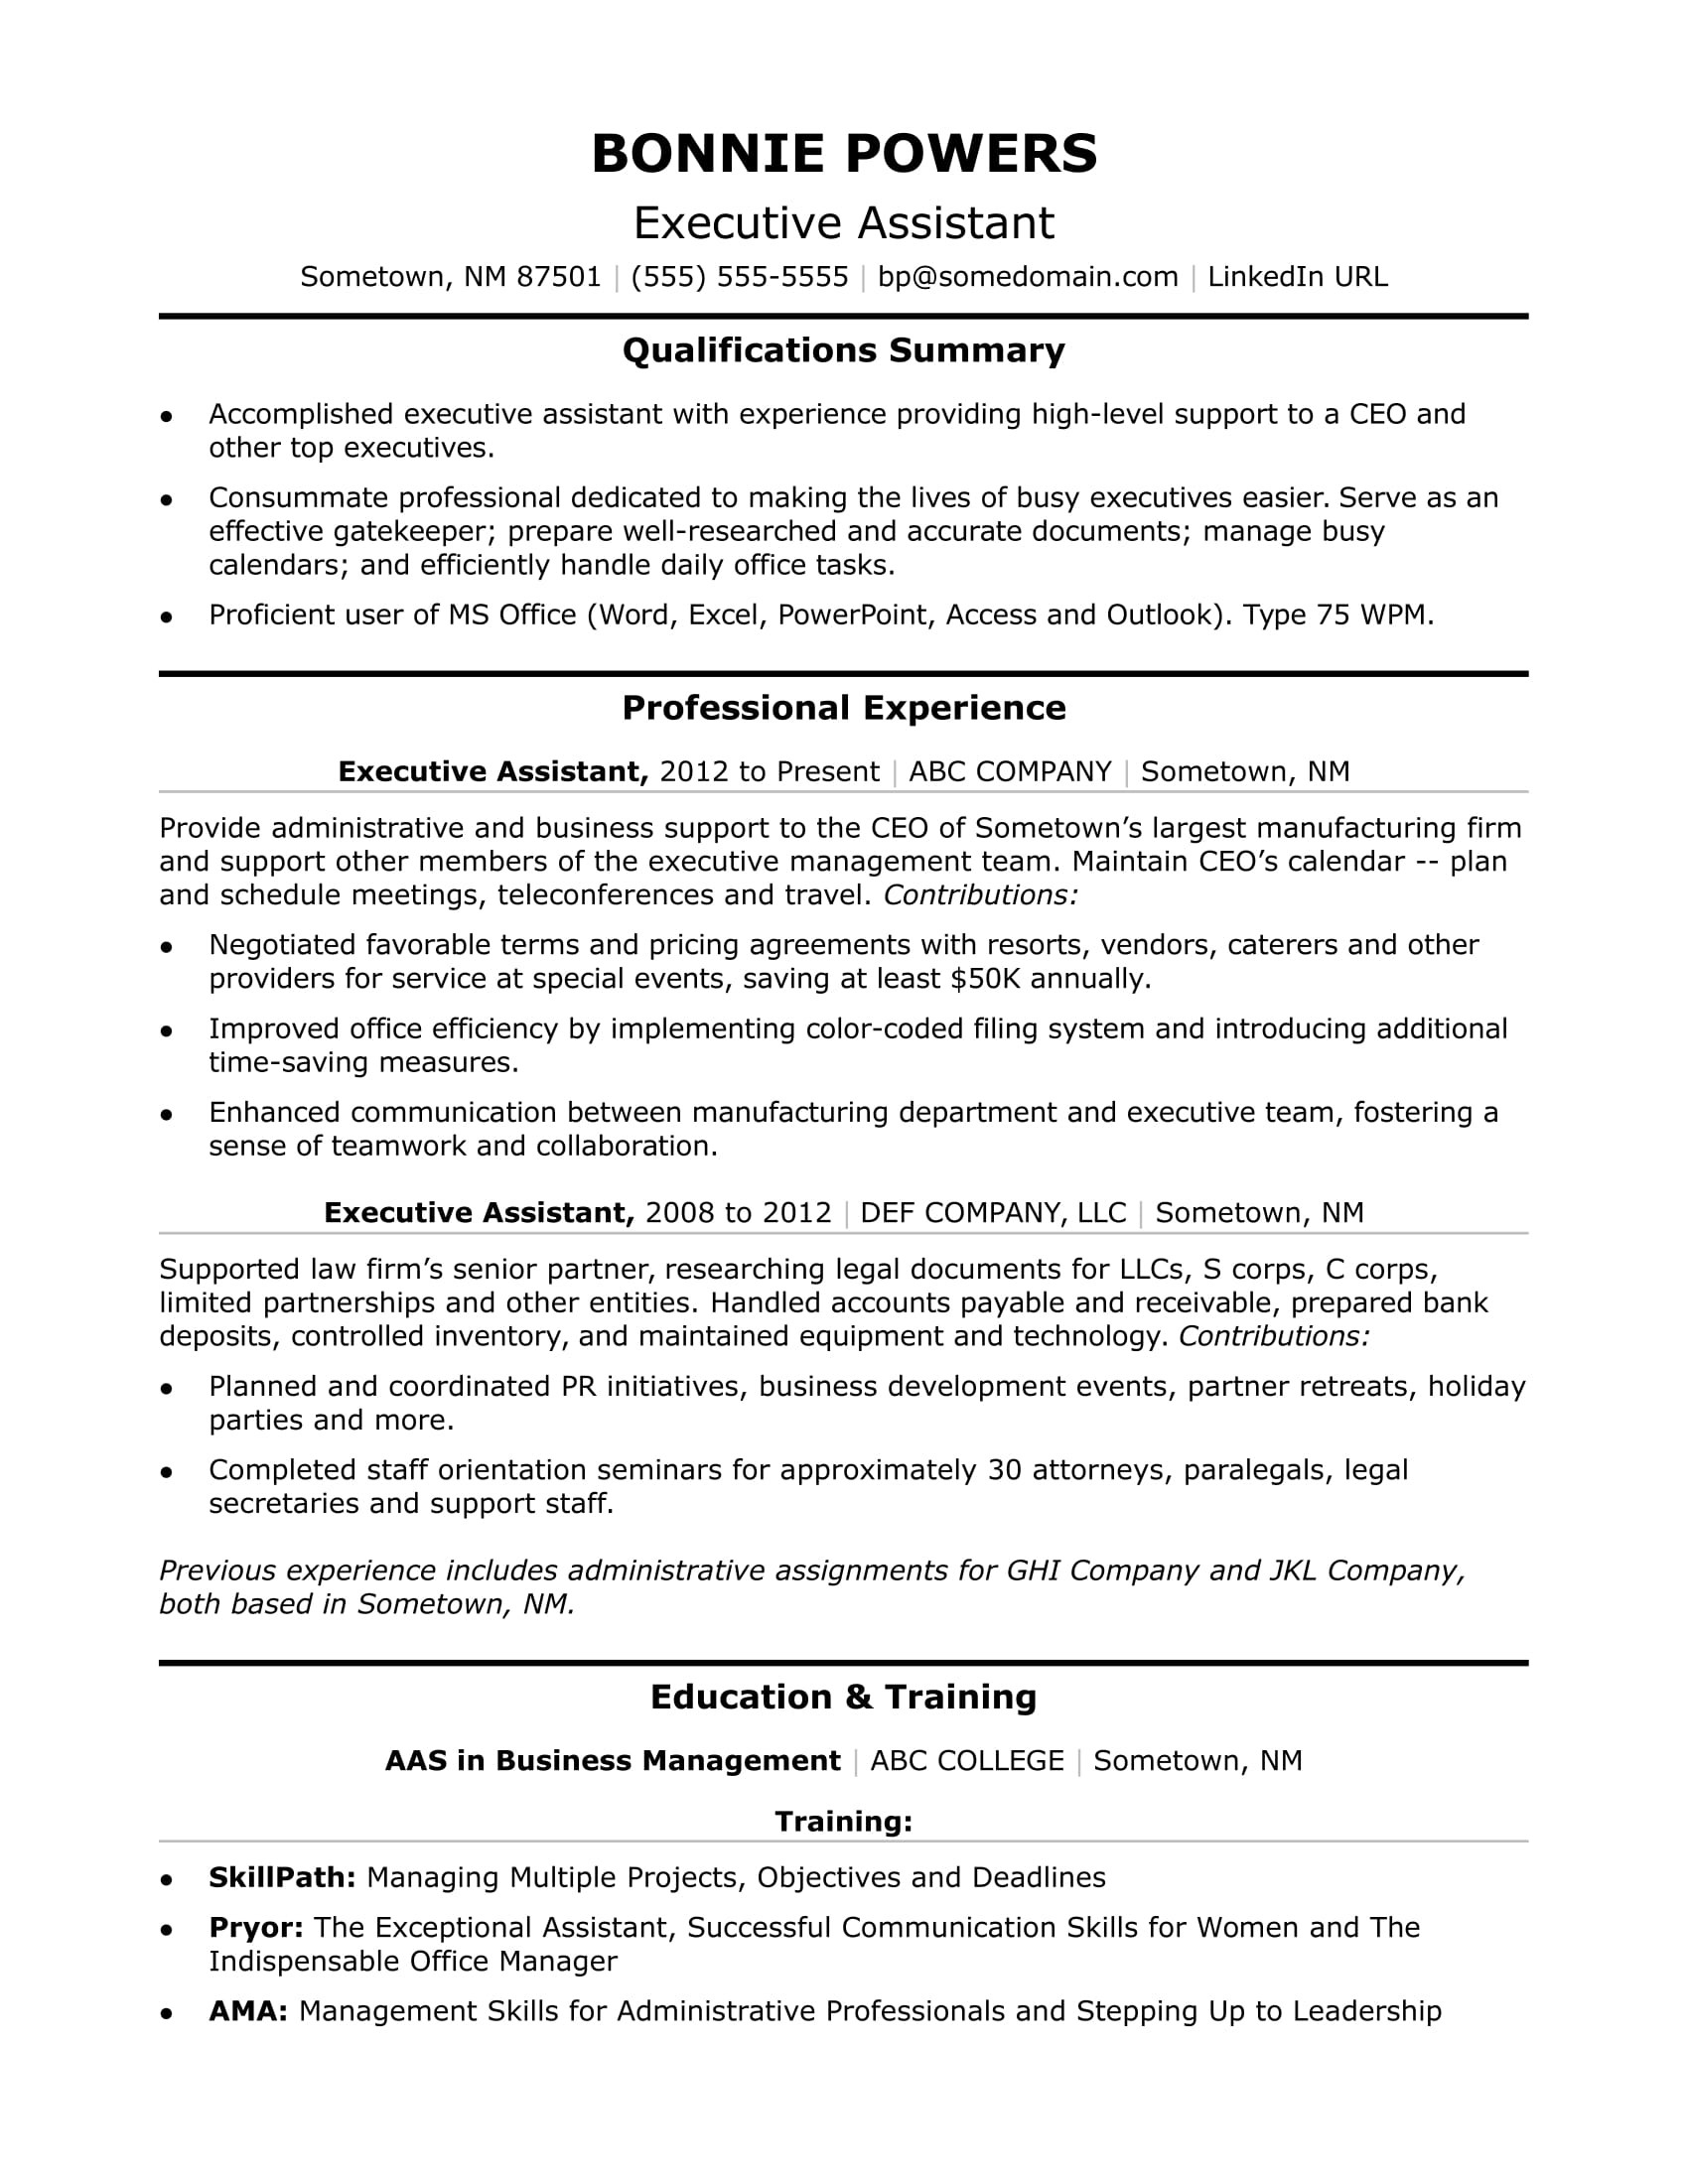 High Level Executive assistant Resume Sample Executive assistant Resume Monster.com